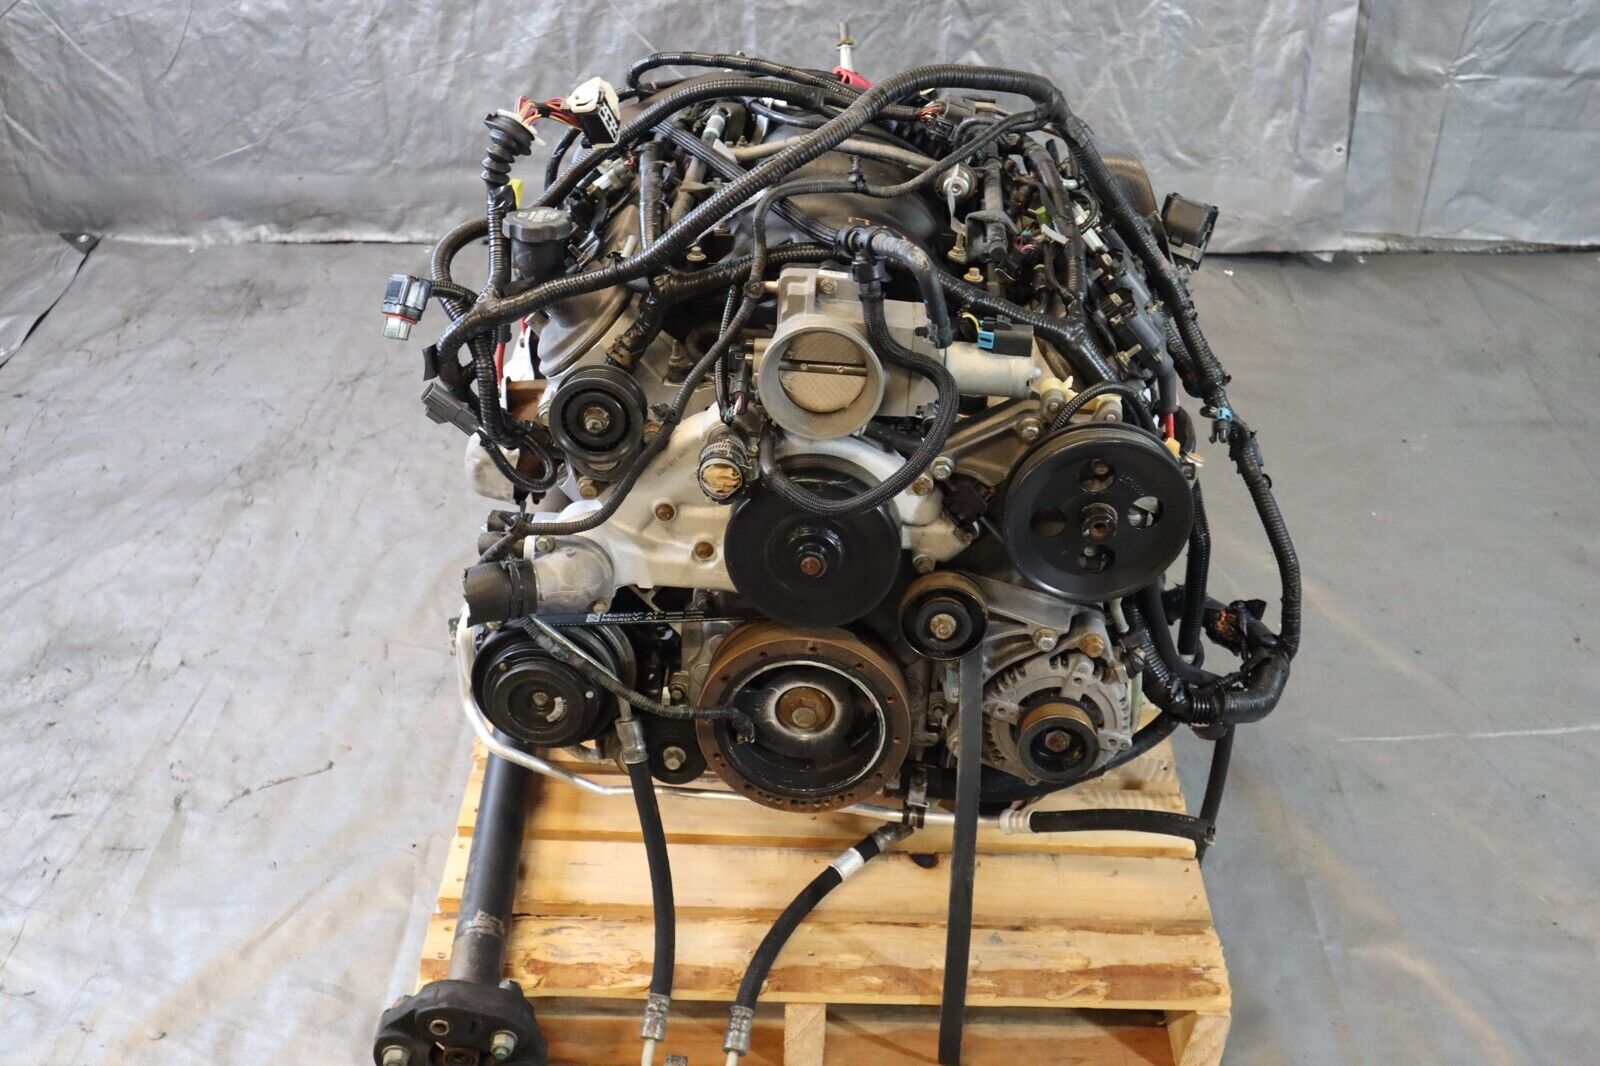 2004 CADILLAC CTS-V Z06 LS6 5.7L ENGINE T-56 6 SPEED TRANSMISSION SWAP DROPOUT